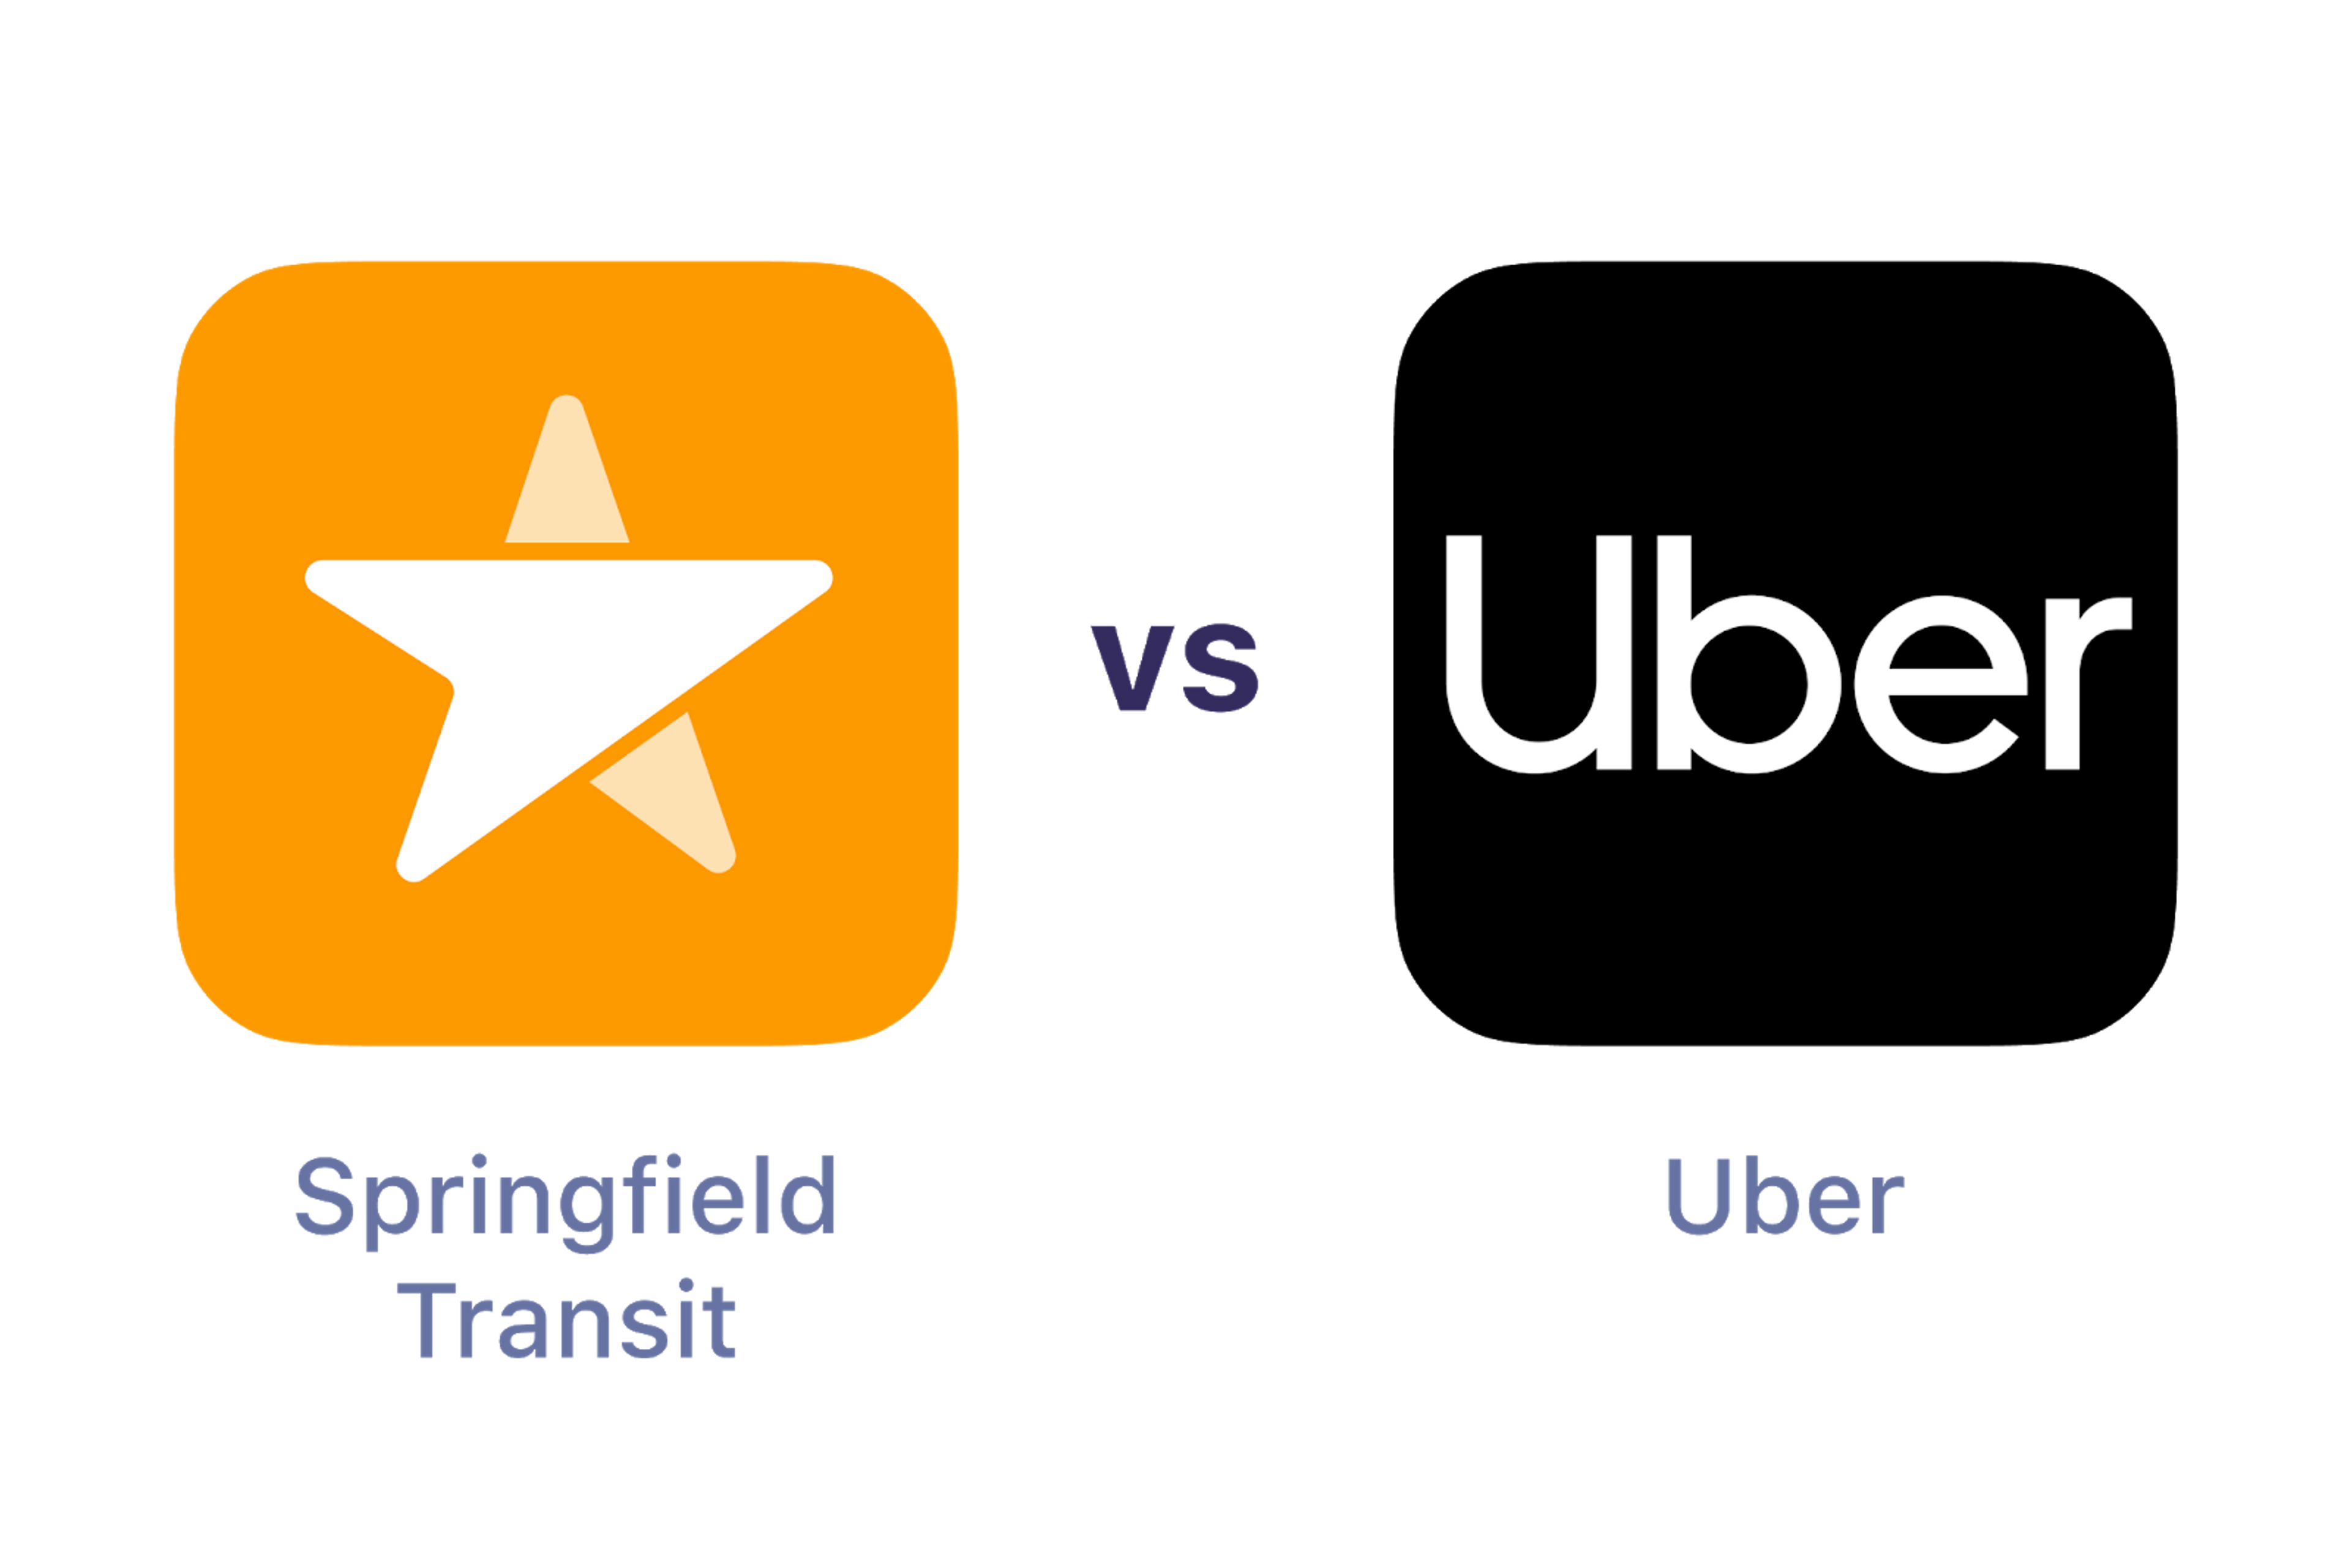 Comparing Springfield Transit and Uber